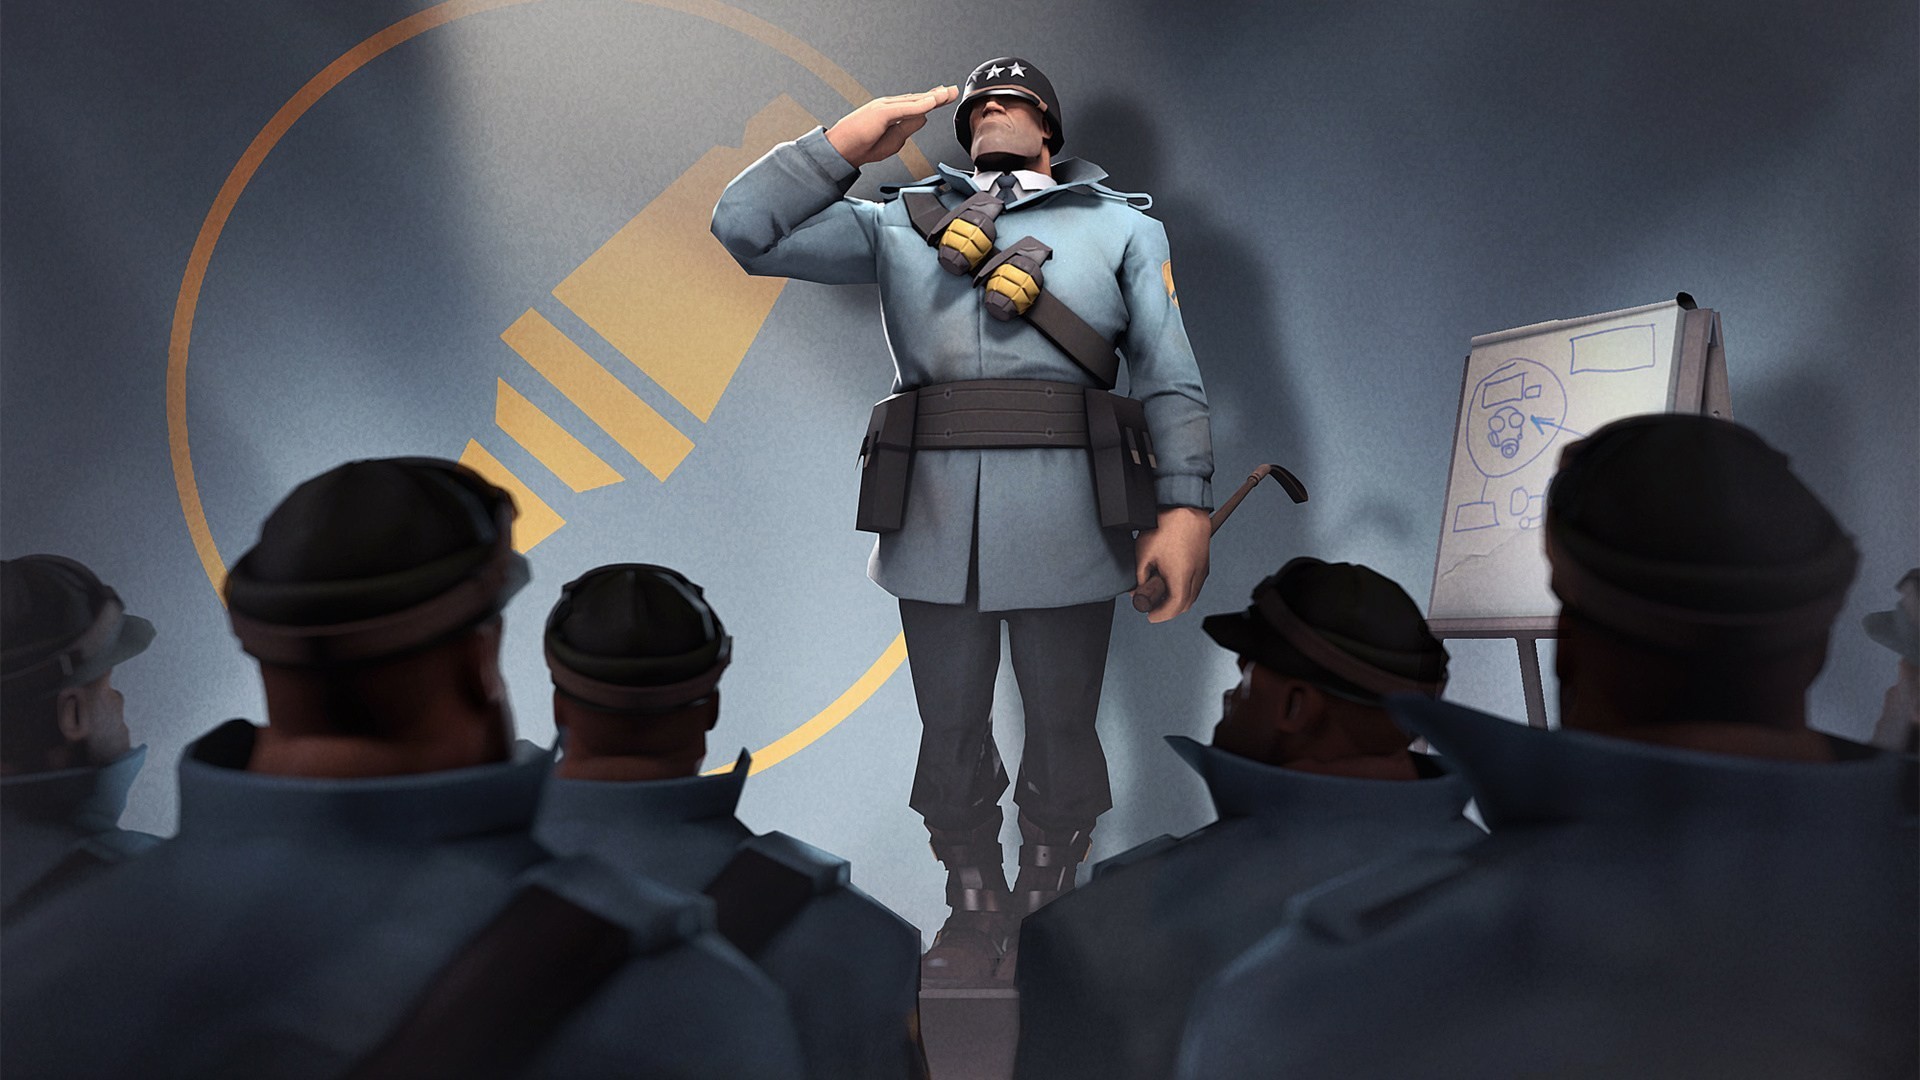 1920x1080 Team Fortress 2 Soldier 1080p HD Wallpaper Background